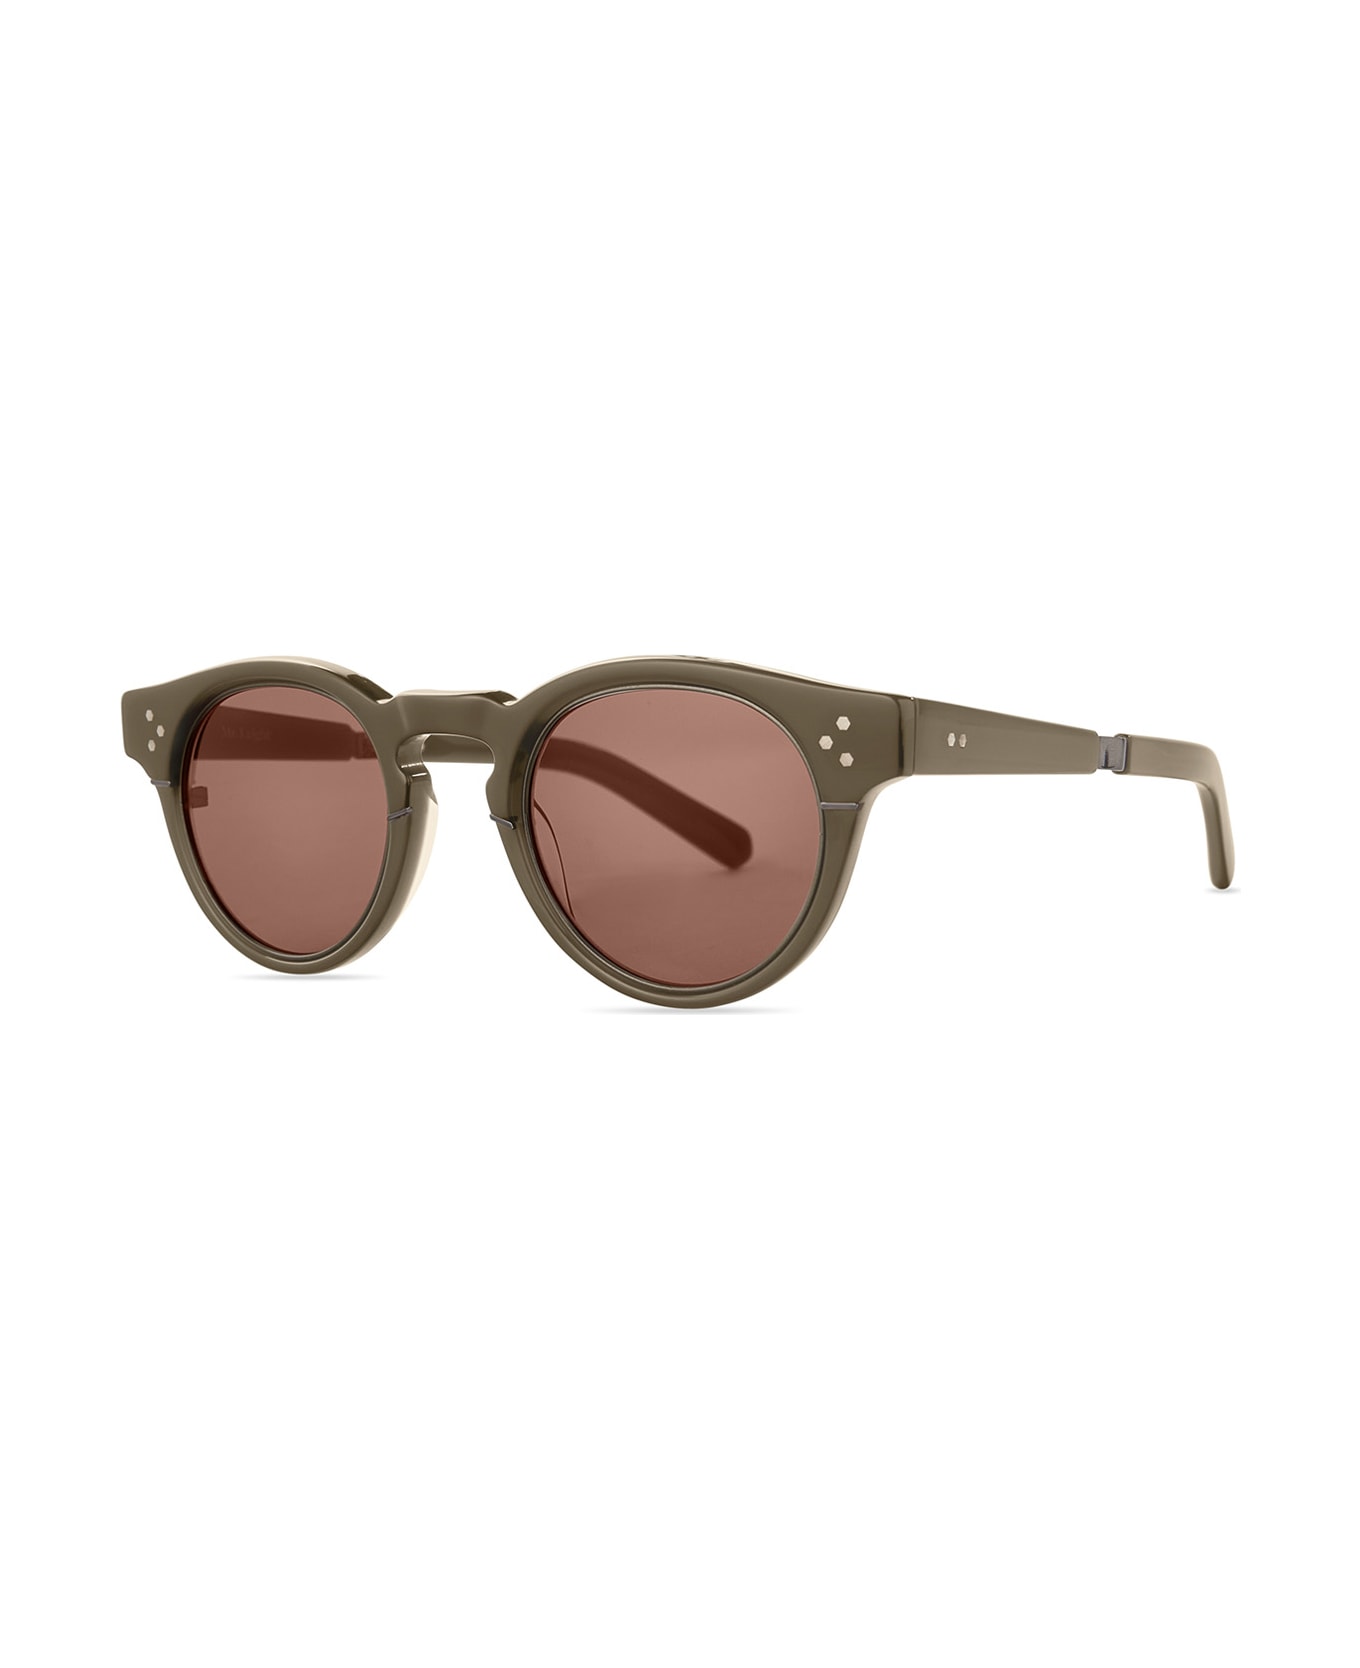 Mr. Leight Kennedy S Citrine-chocolate Gold/orchid Sunglasses - Citrine-Chocolate Gold/Orchid サングラス